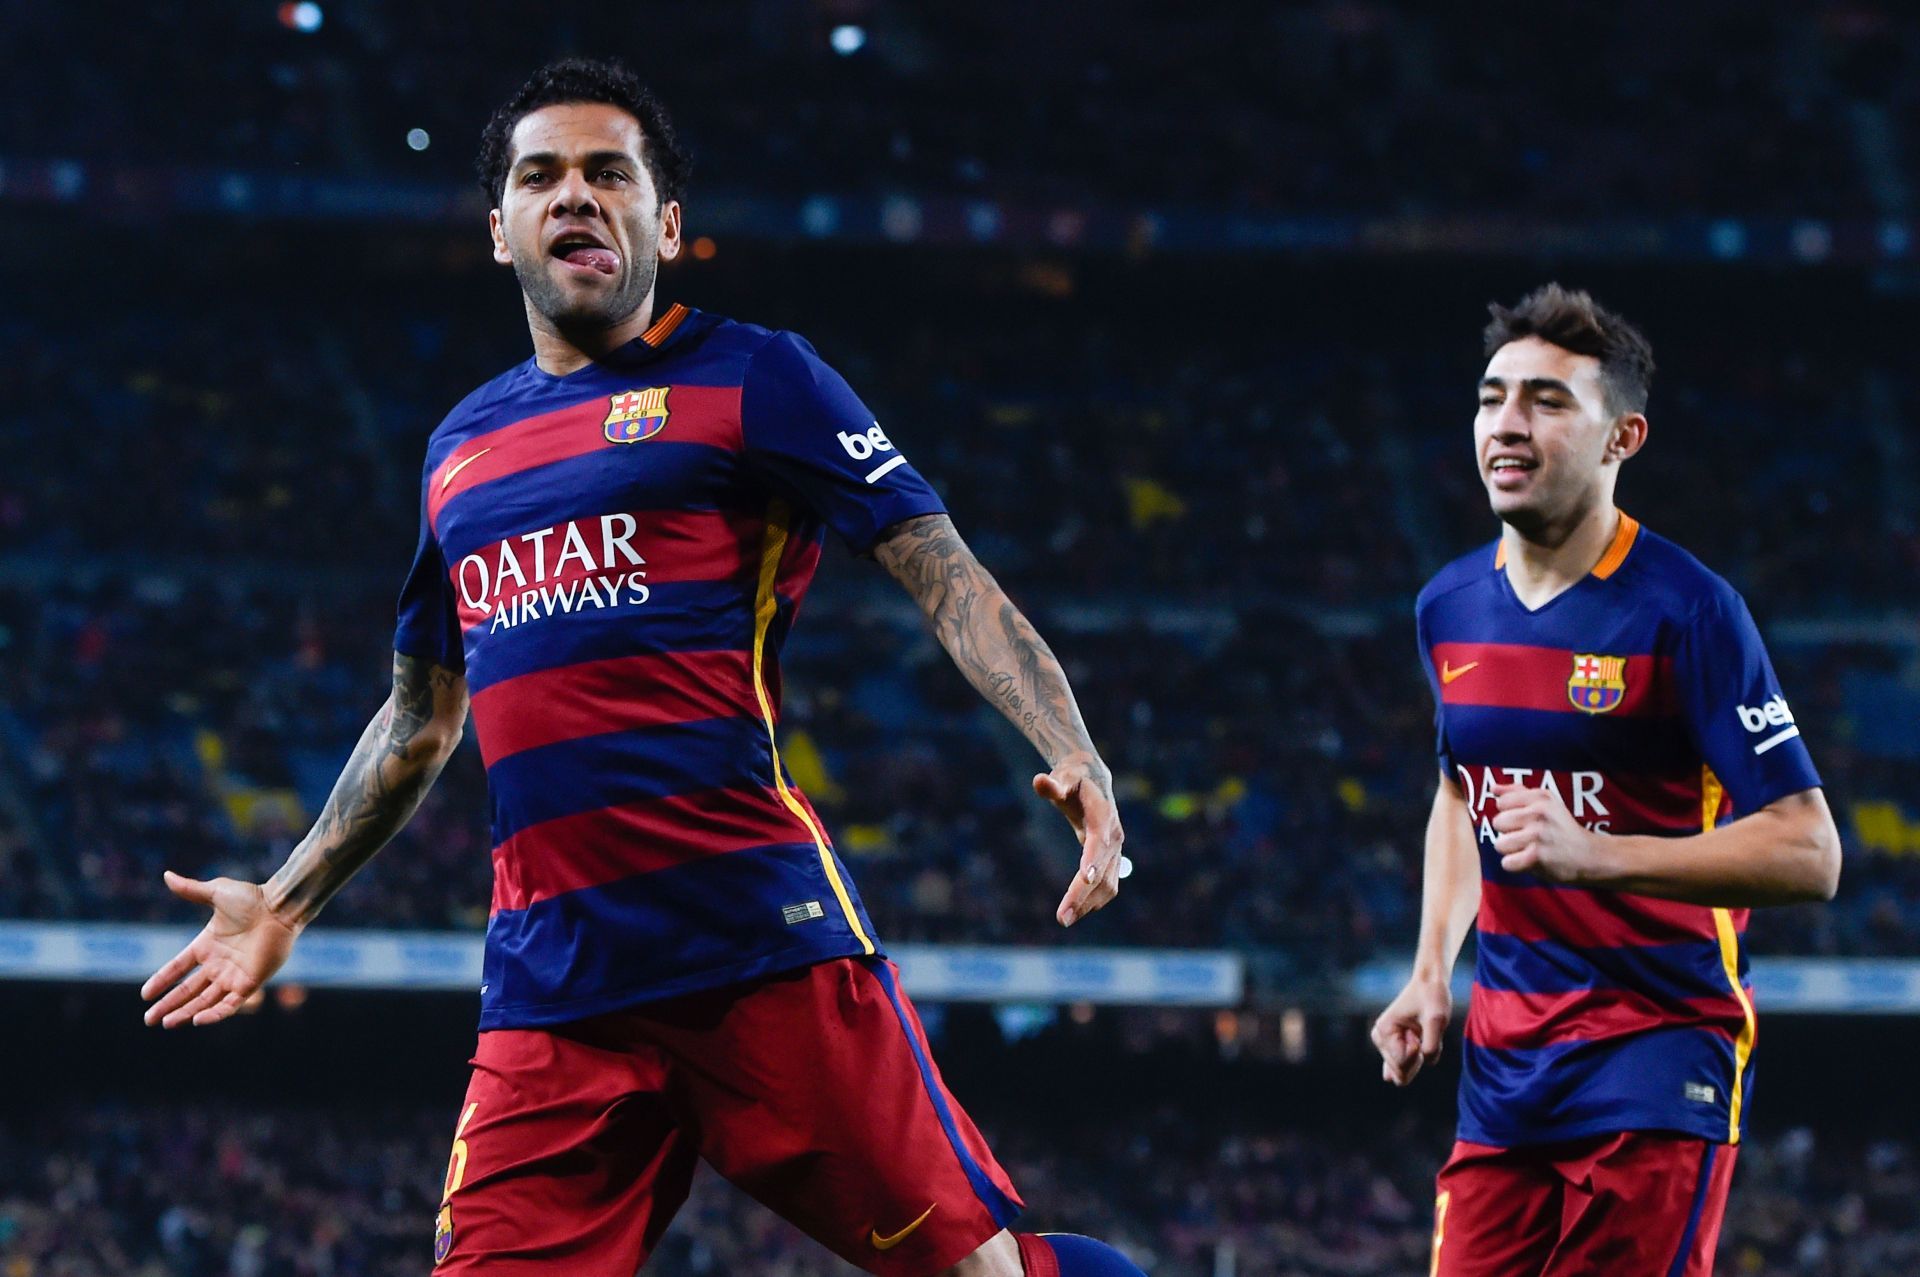 Dani Alves left is the most decorated player in football with 43 trophies